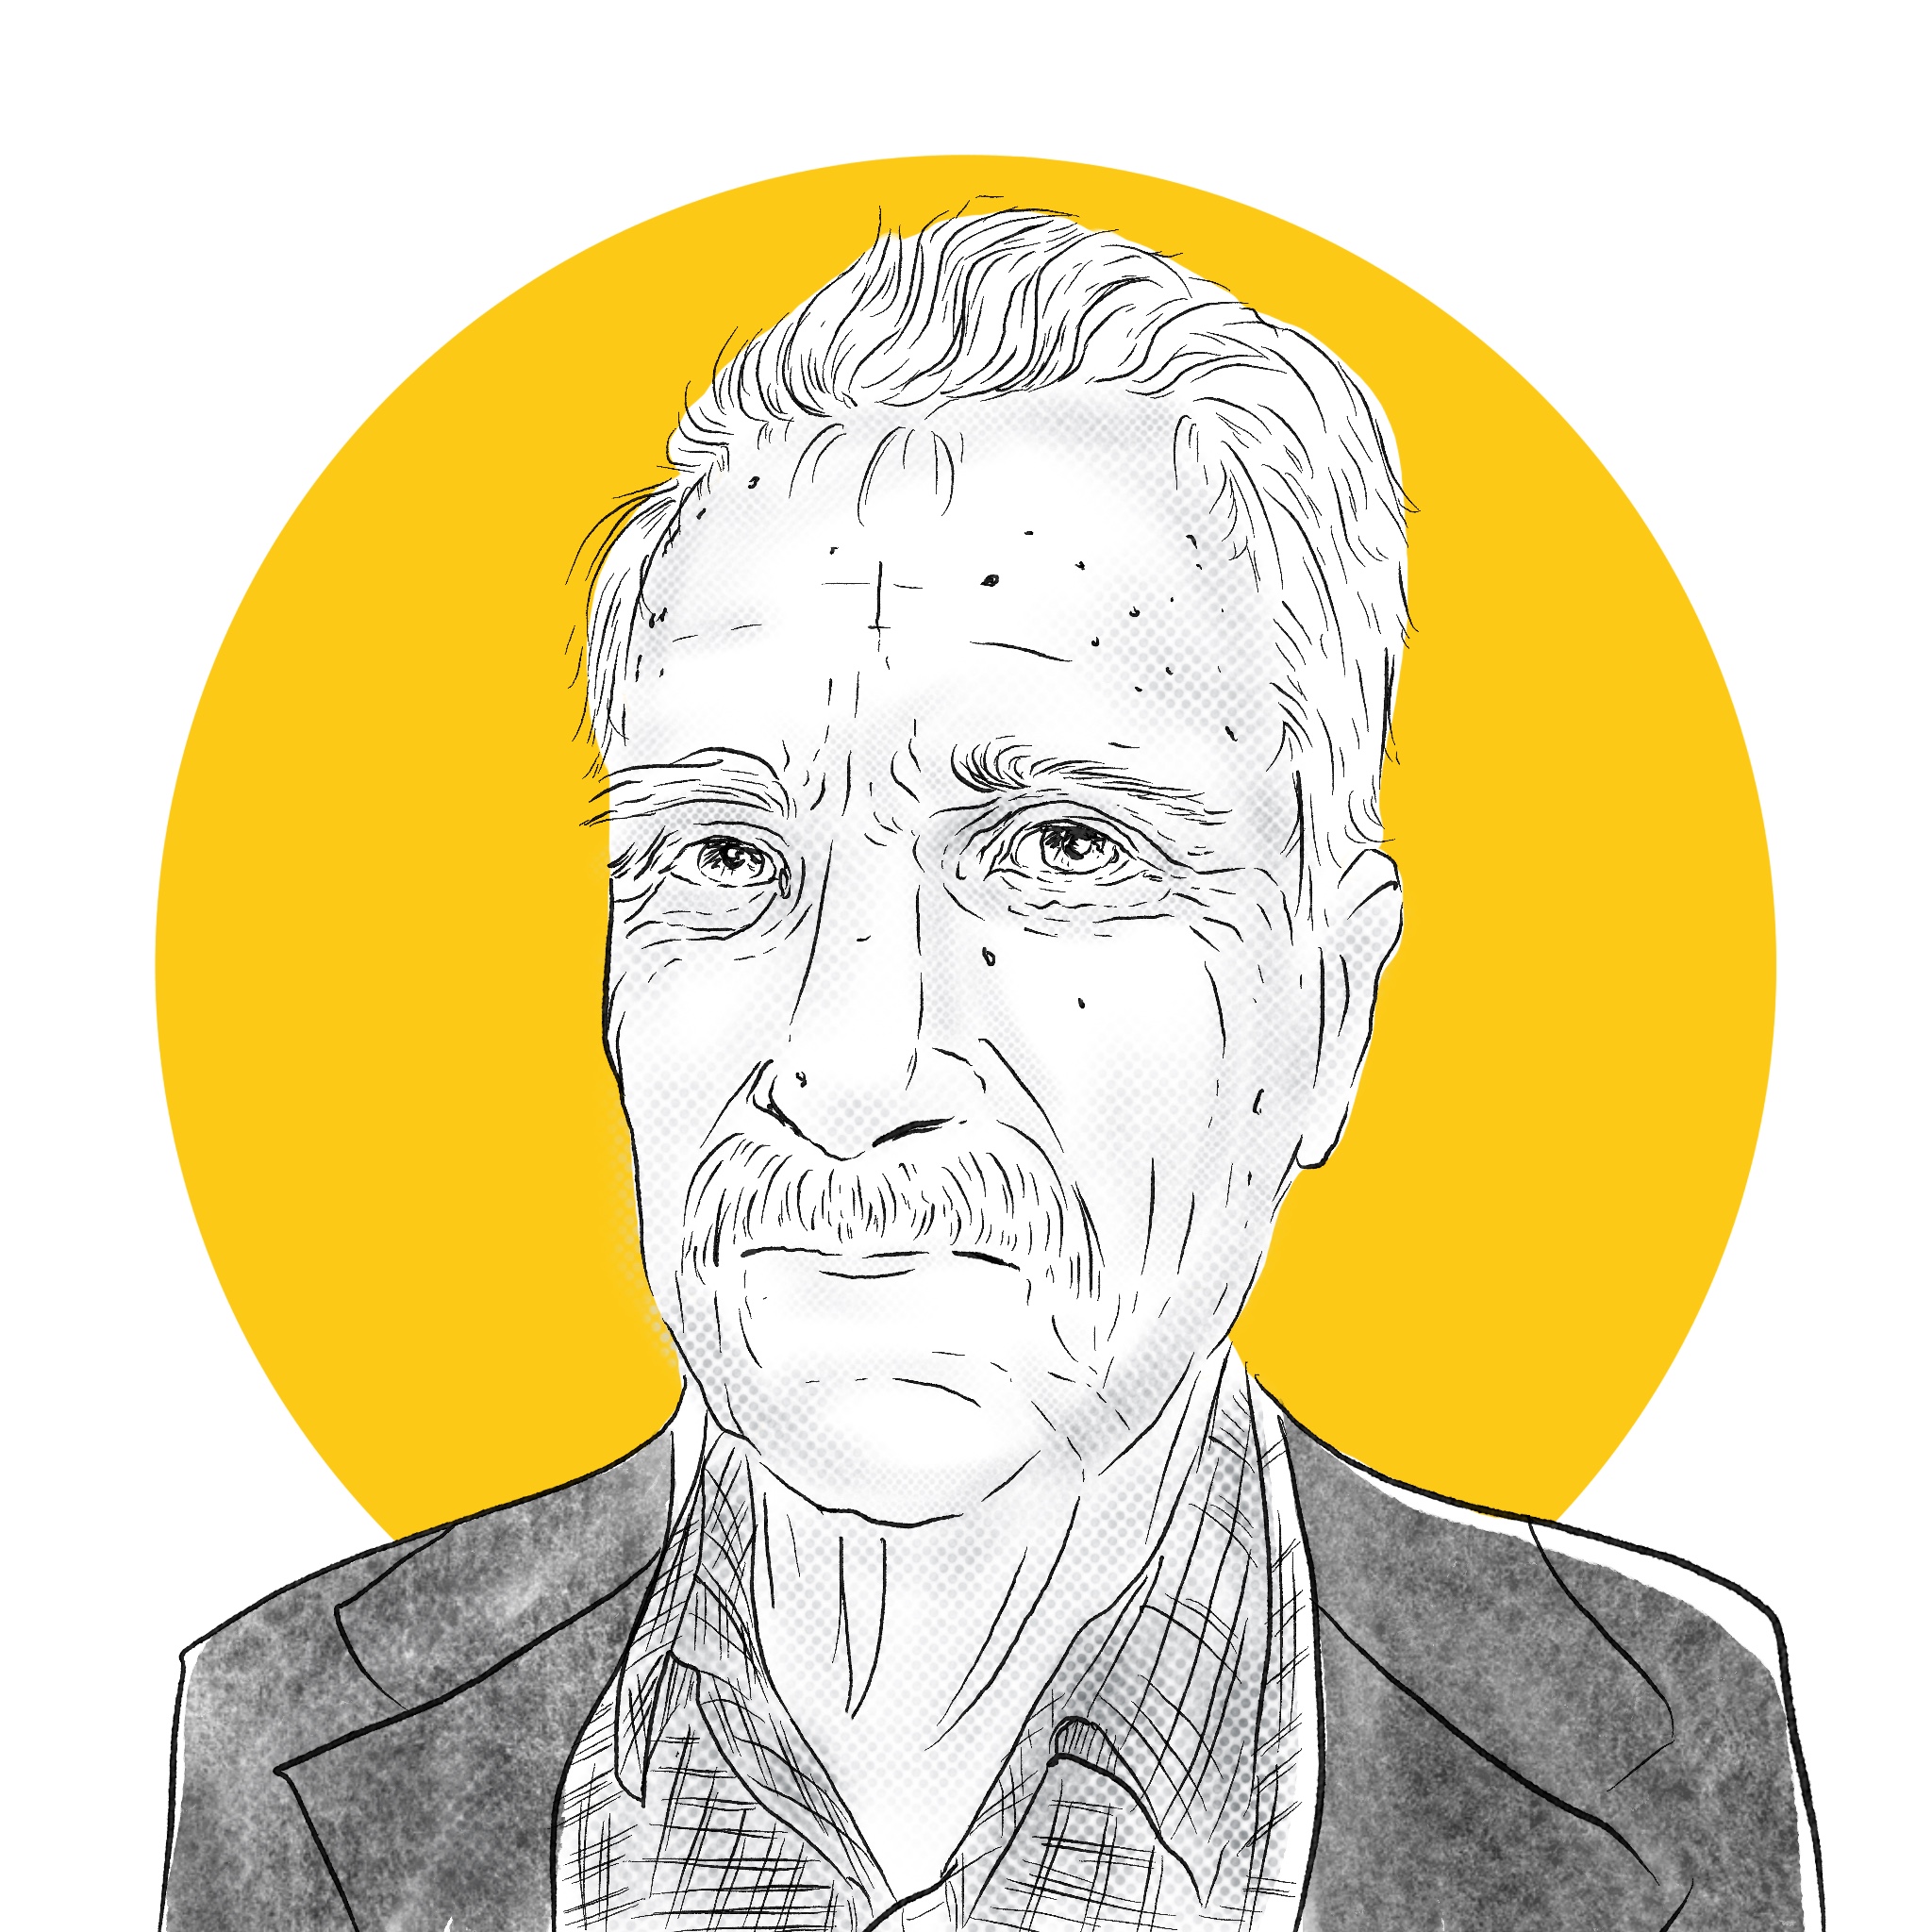 A black and white, pen and ink digital portrait of Philip J. Cook. There is a large yellow dot behind the drawing.